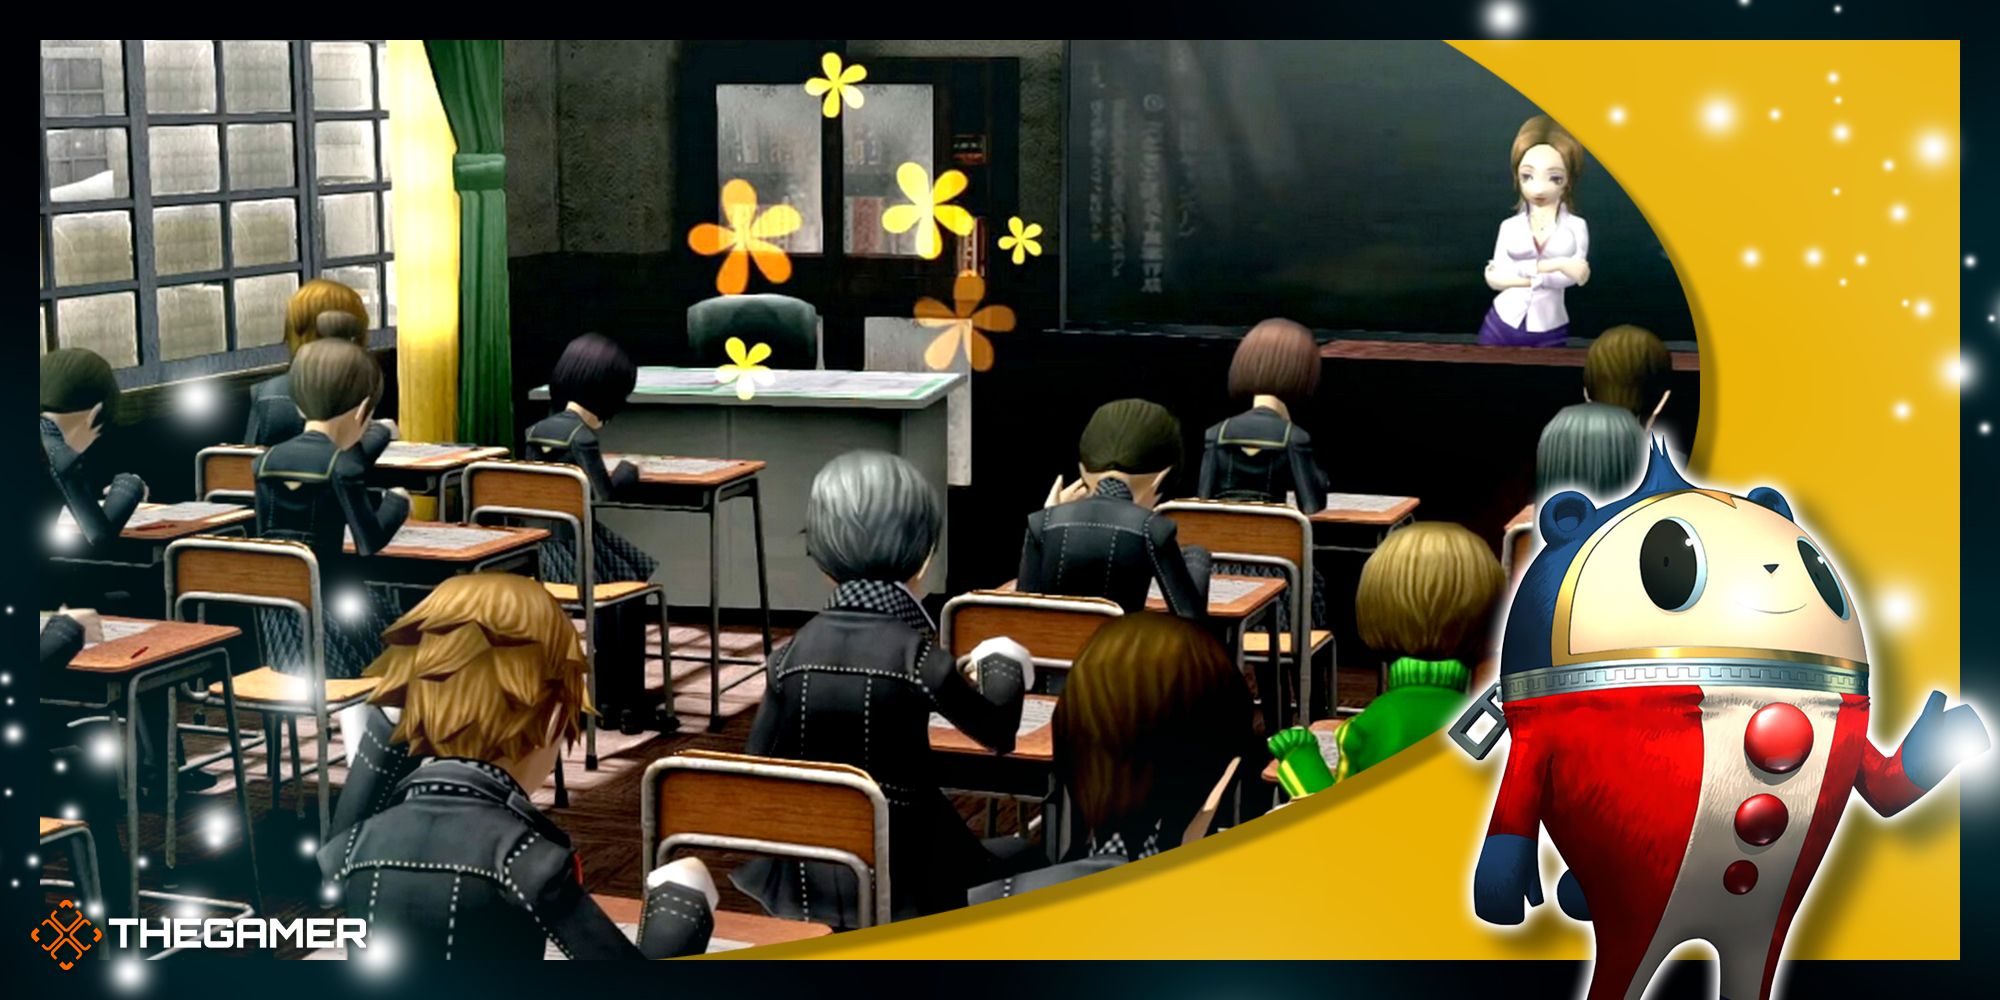 Persona 4 Golden - Yosuke, Yu, and Chie sitting in class while their teacher talks, with a Teddie overlay in the corner.